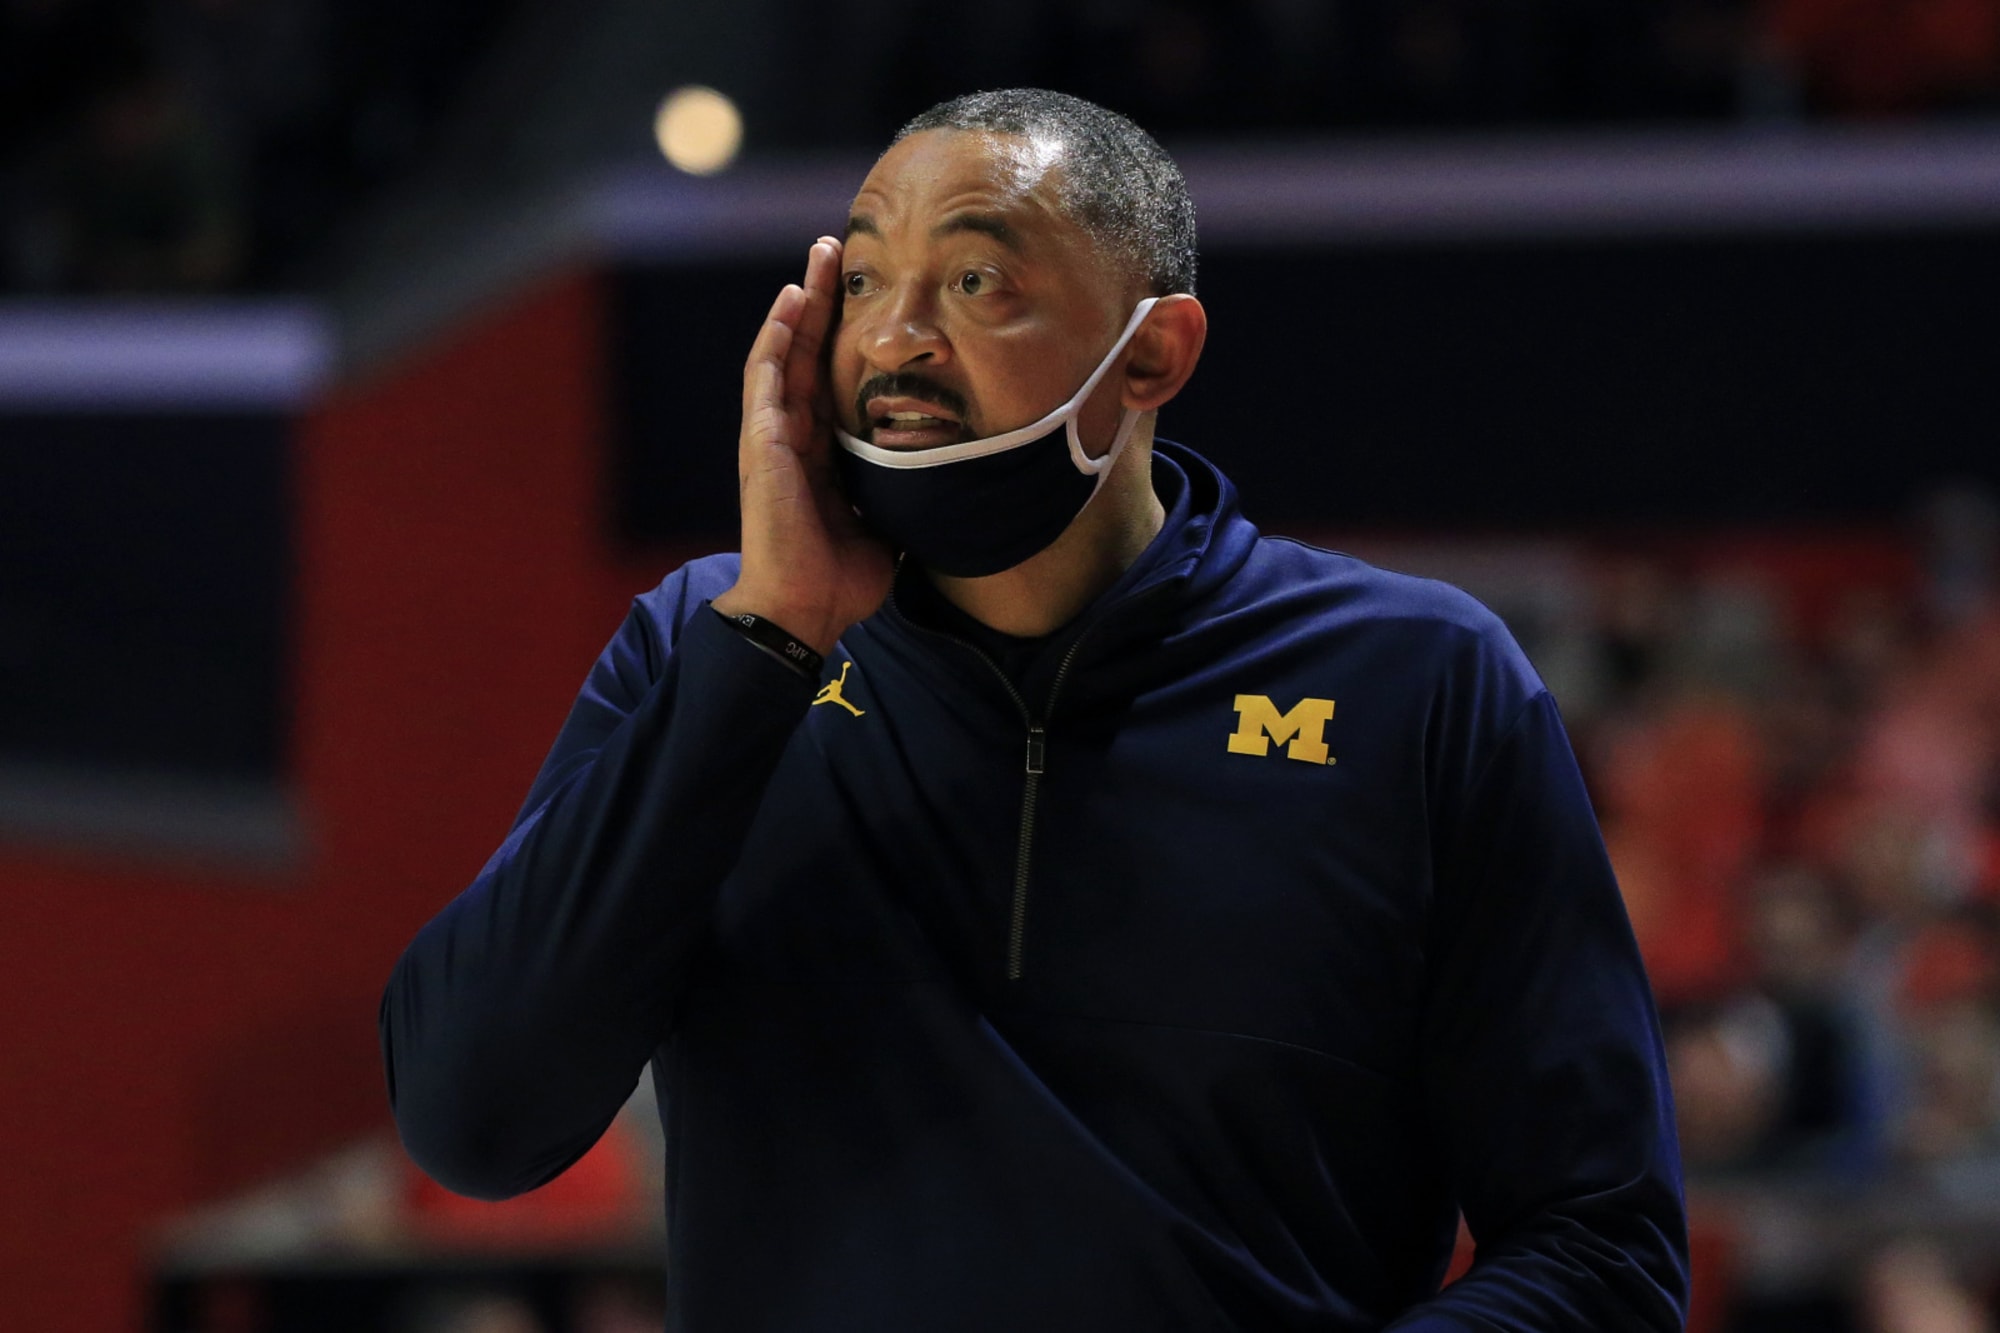 Michigan basketball: Could Juwan Howard be fired for throwing a punch?